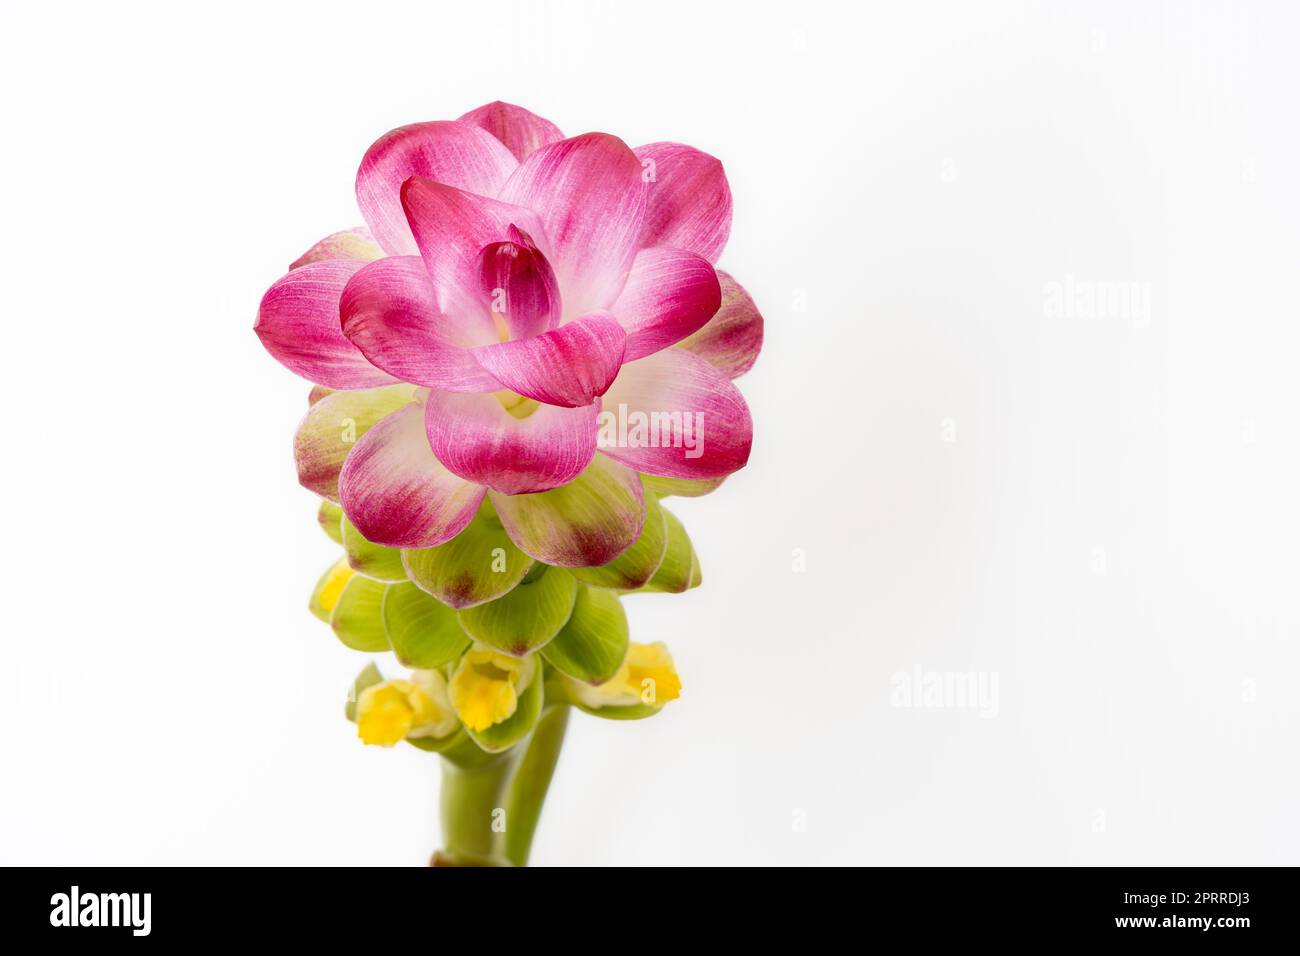 Closeup view of colorful green, purple pink and yellow flower of curcuma aromatica or wild turmeric isolated on white background Stock Photo